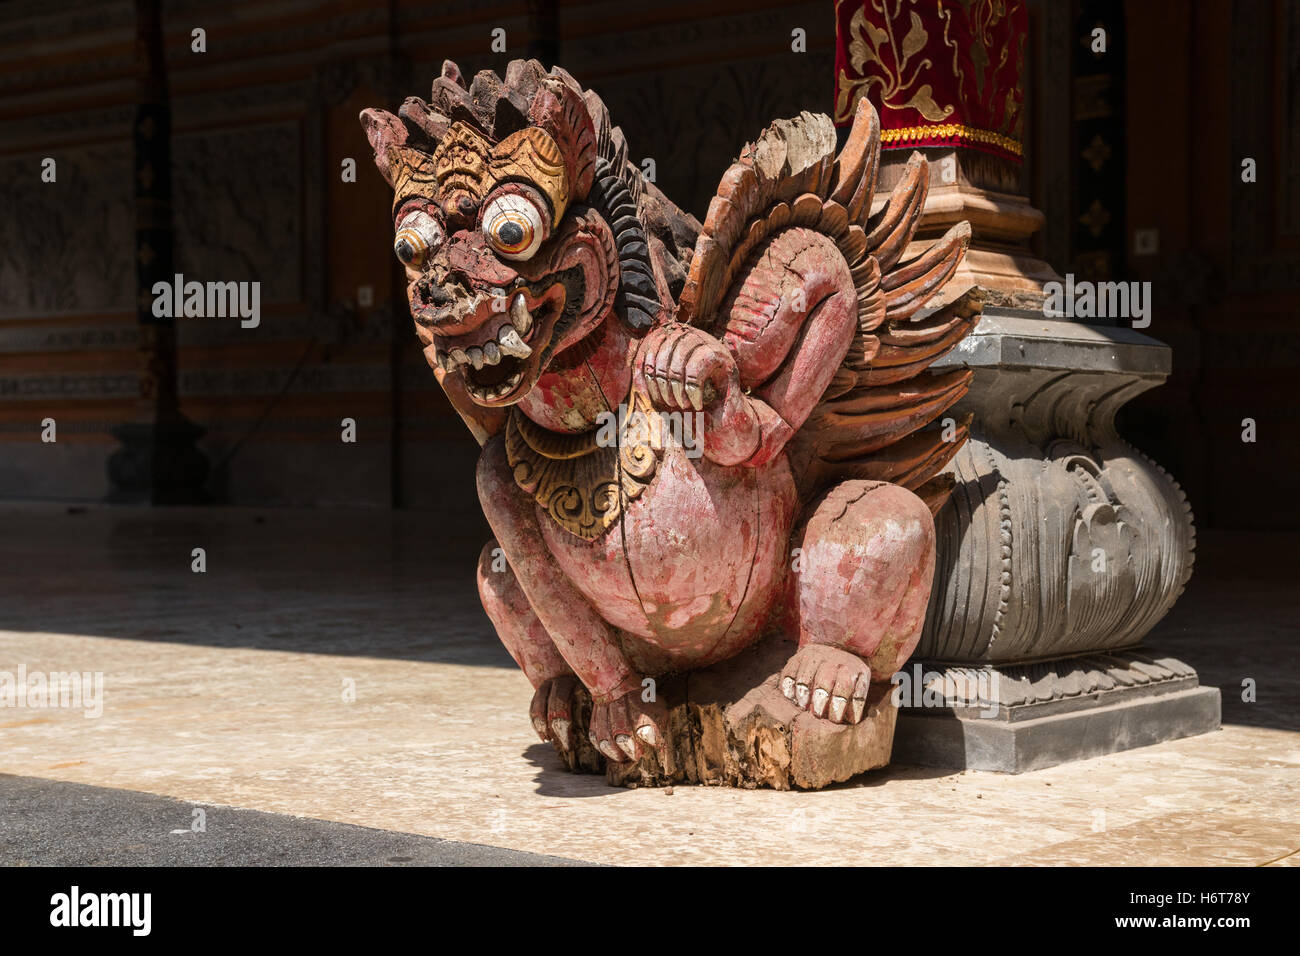 Old, painted, wooden statue at the hindu Puri Kantor temple, Ubud, Bali, Indonesia. Stock Photo